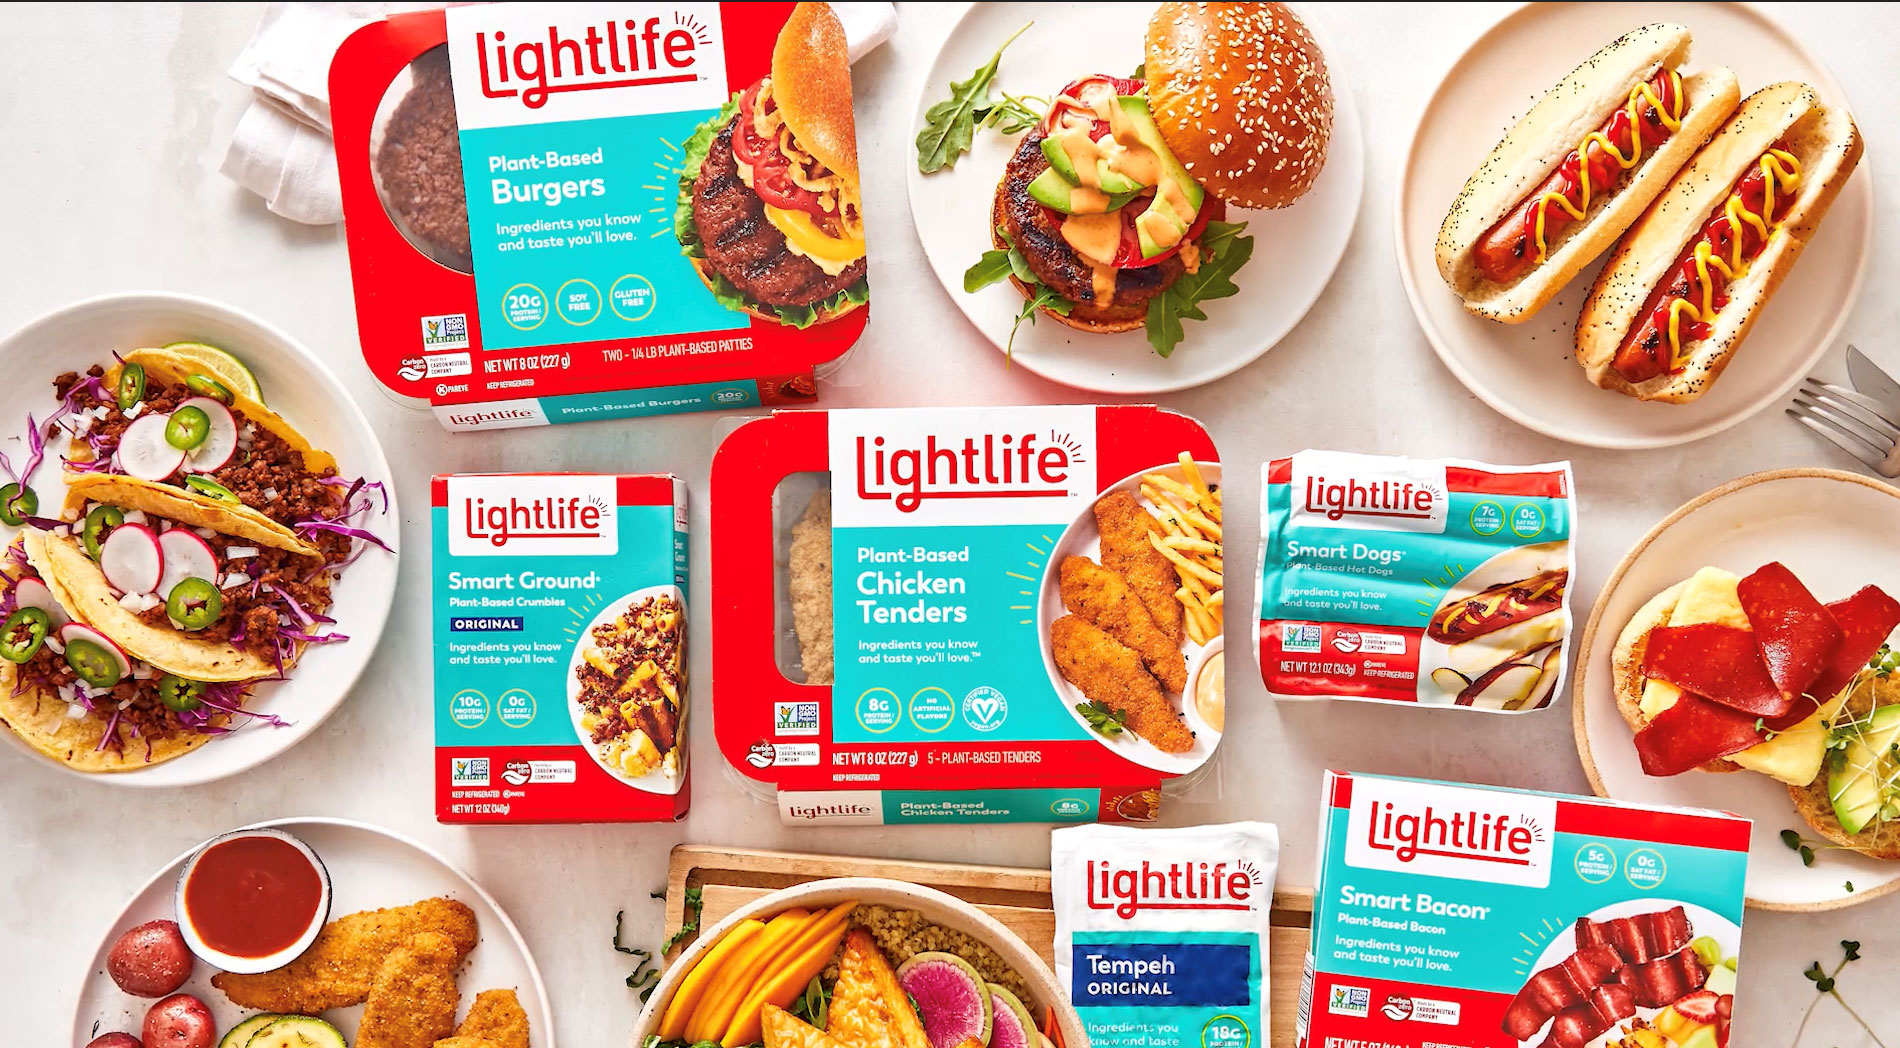 Lightlife Plant-based products including burgers, chicken tenders, smart dogs